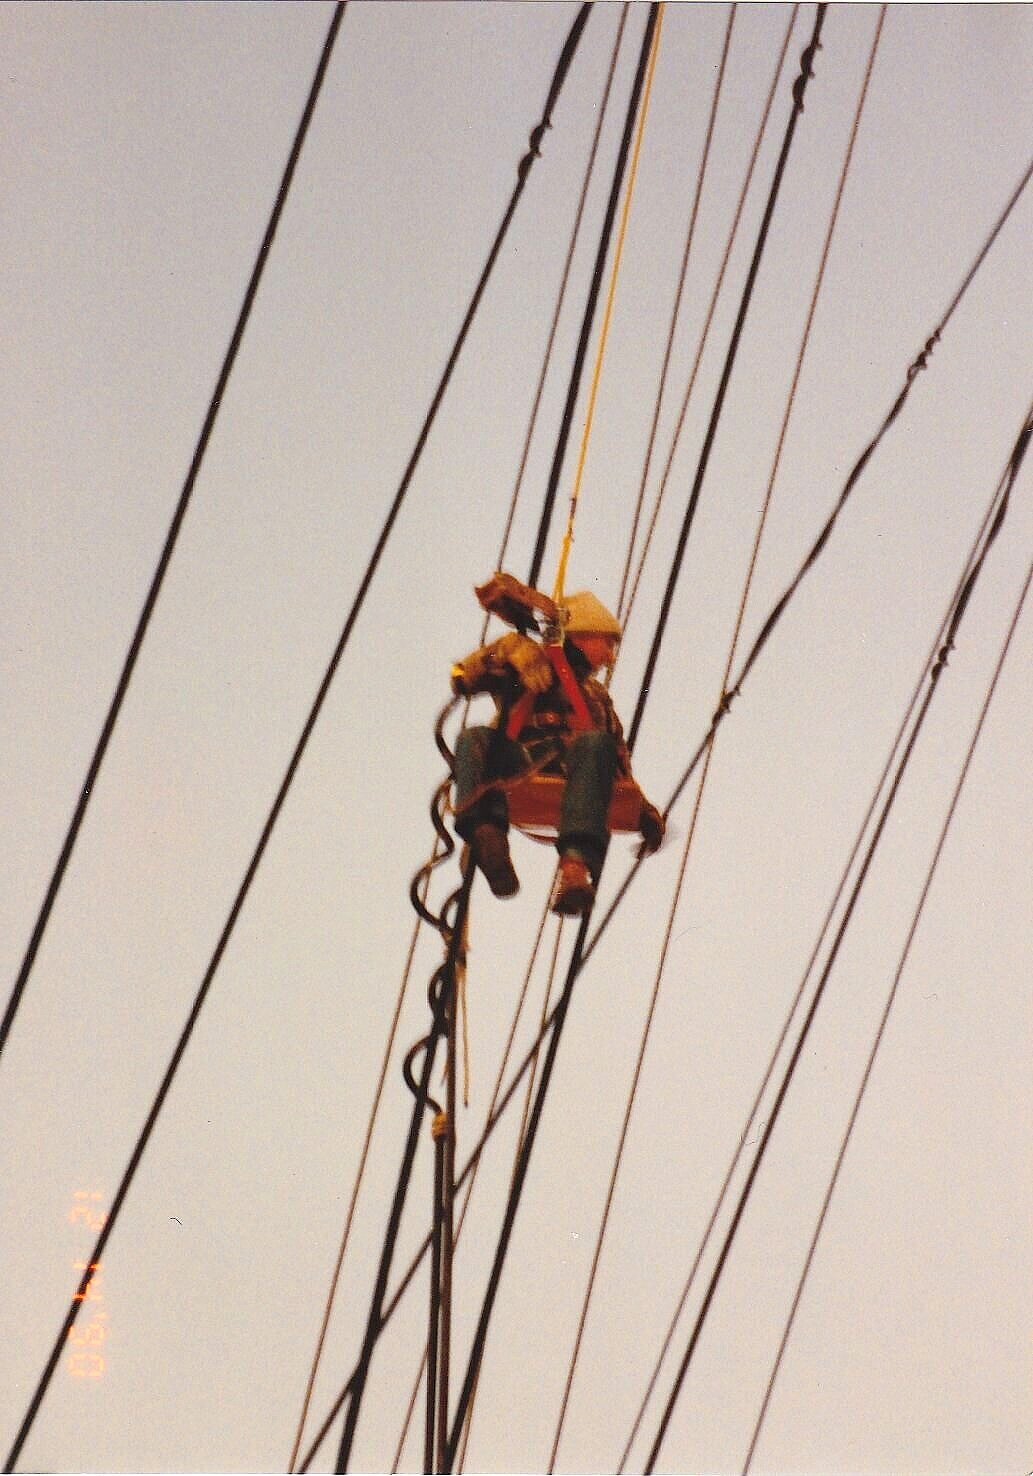 worker suspended among mix of cables